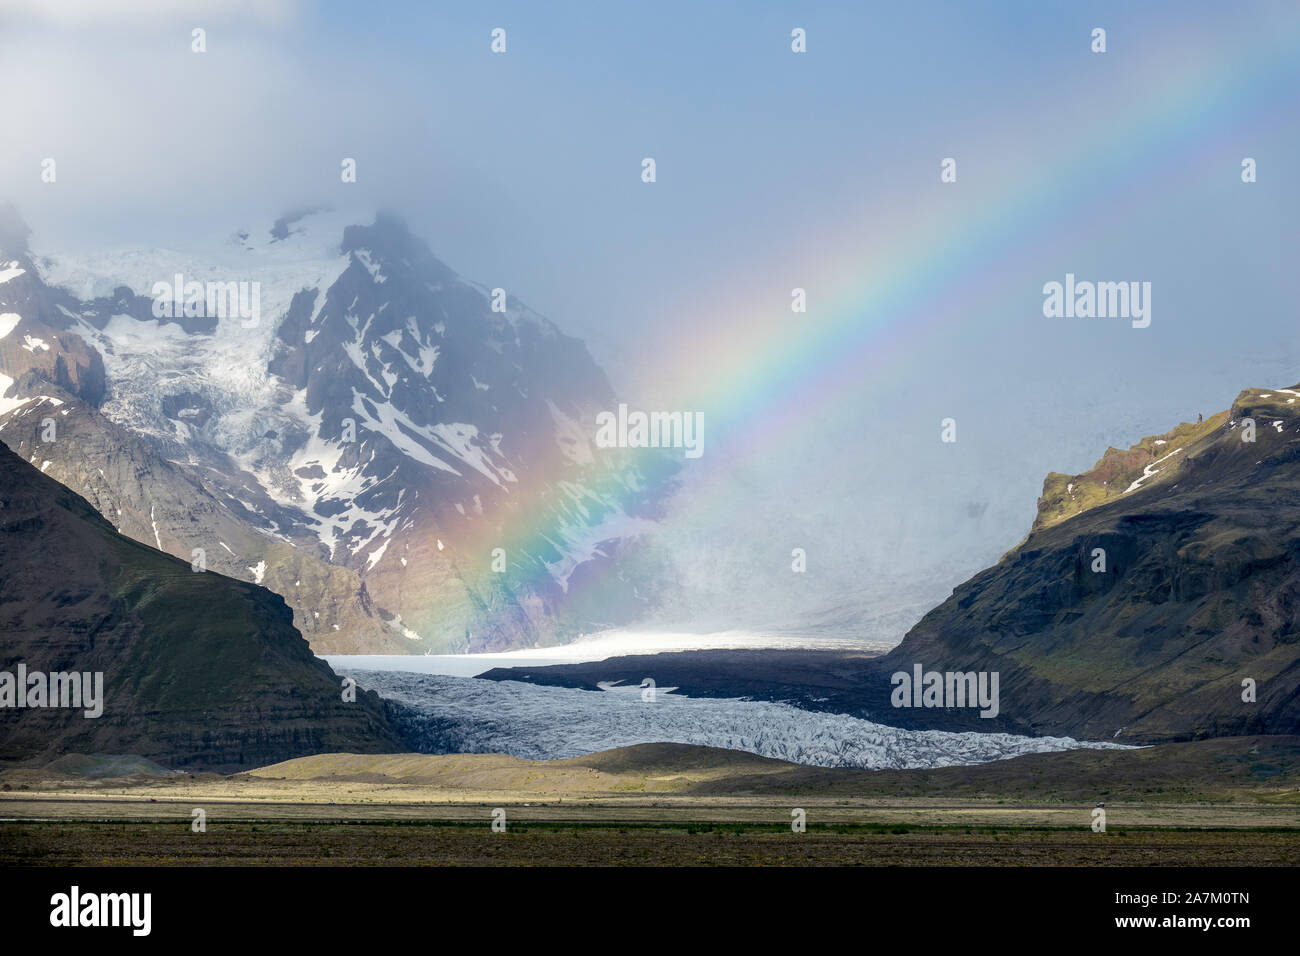 Brilliant and colourful rainbow over Svínafellsjökull glacier and snow-capped mountains, Iceland Stock Photo